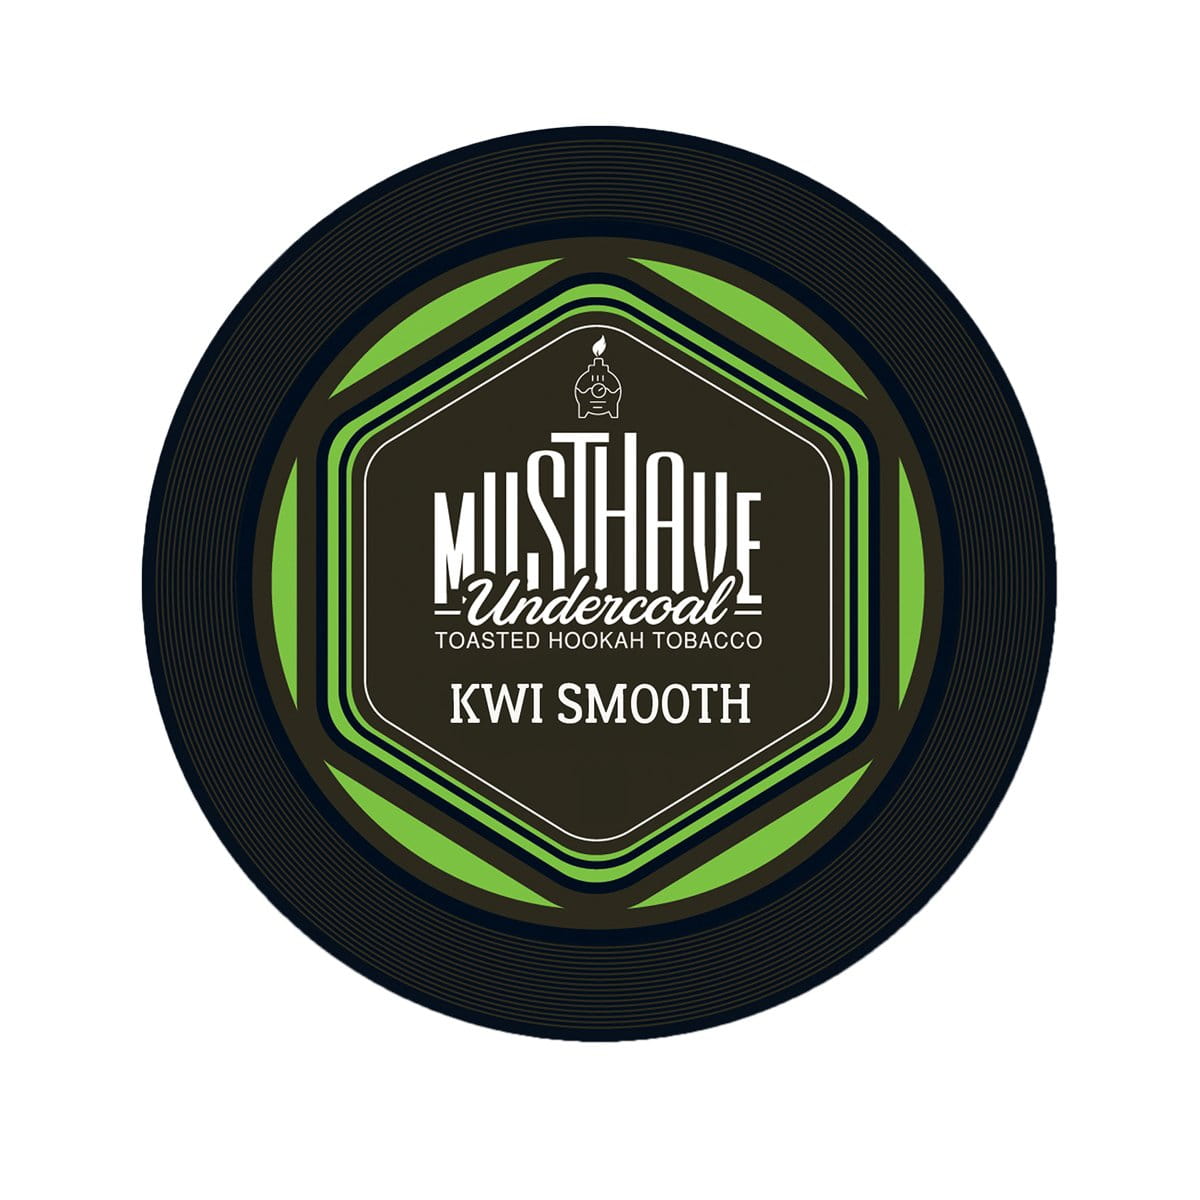 Musthave Tobacco - Kwi Smooth 25g